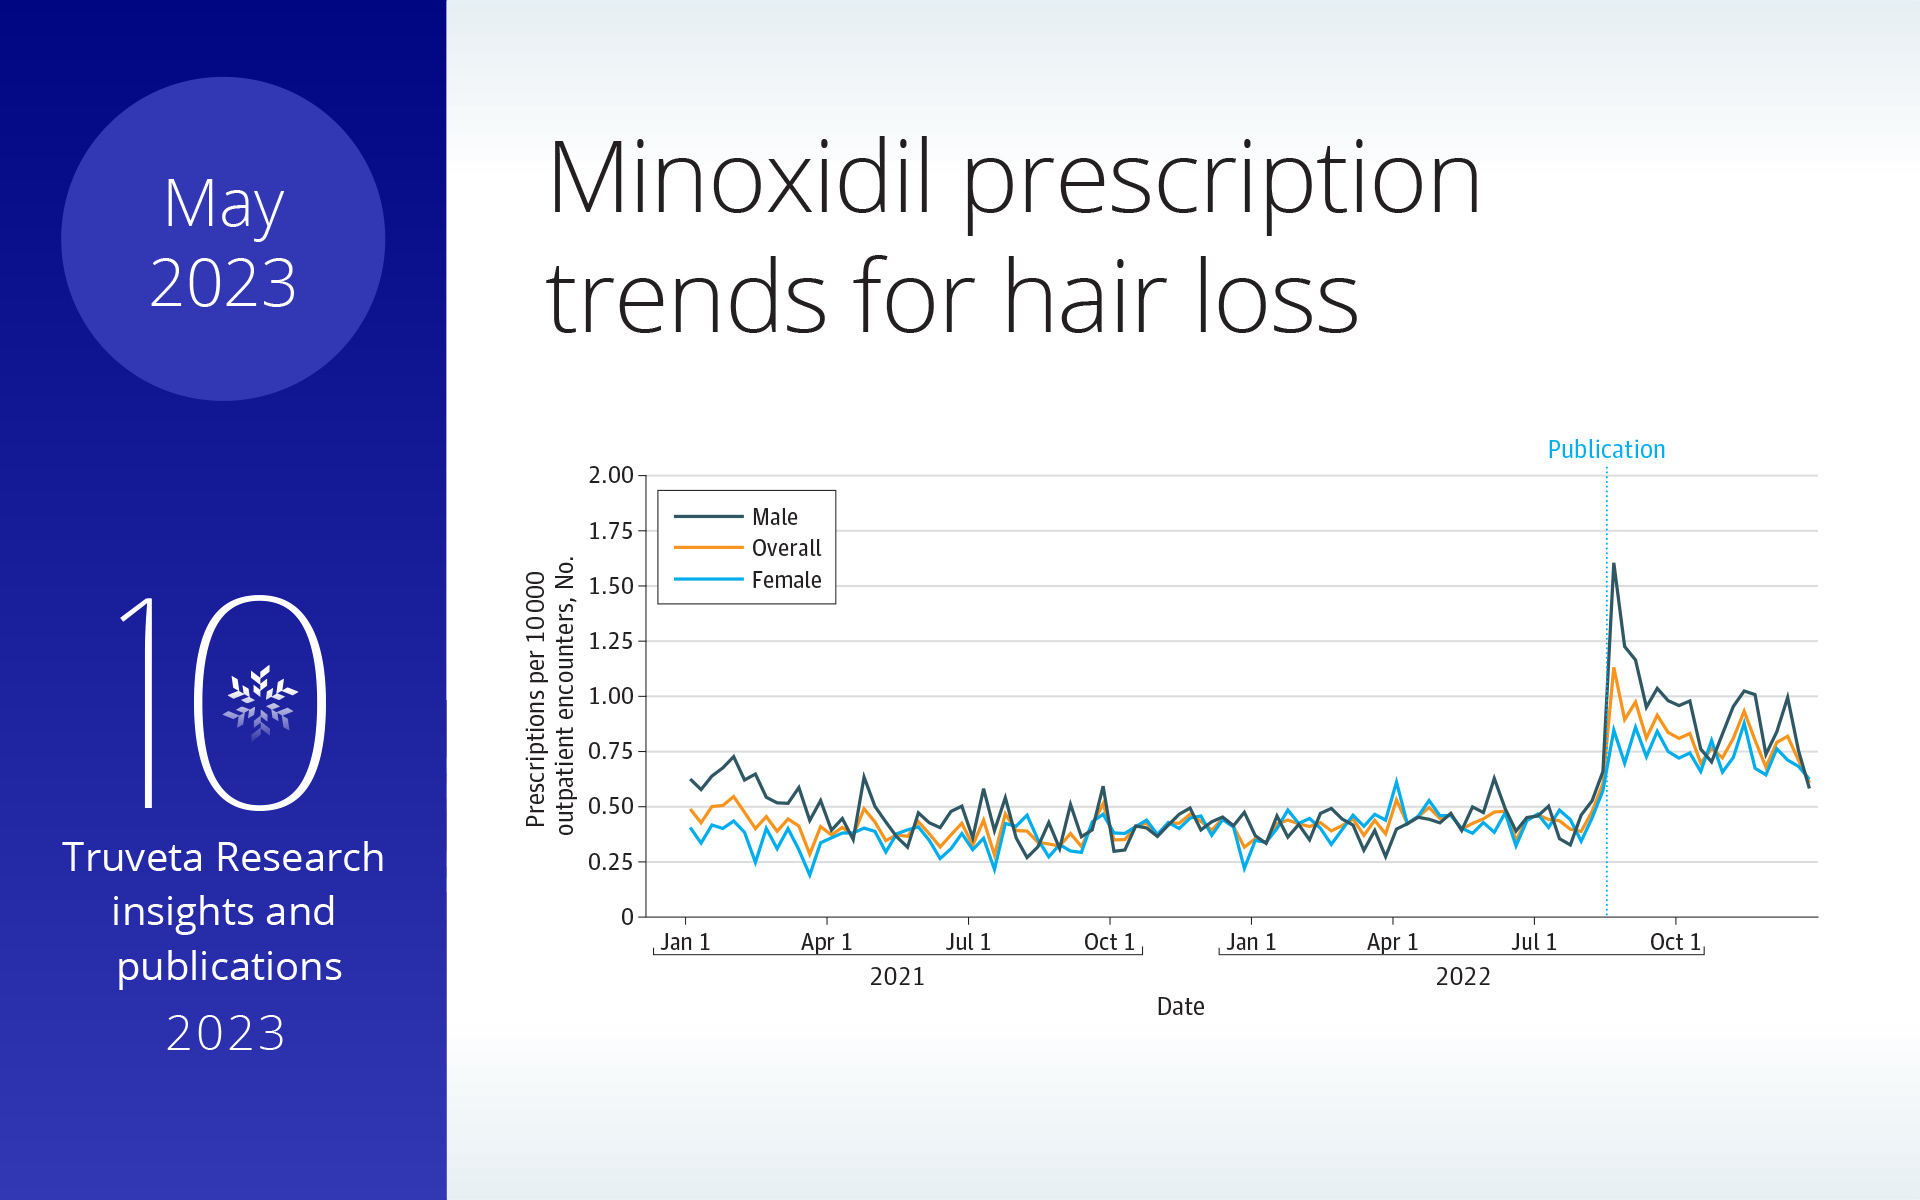 rate increase of prescriptions for oral minoxidil following New York Times story on hair loss